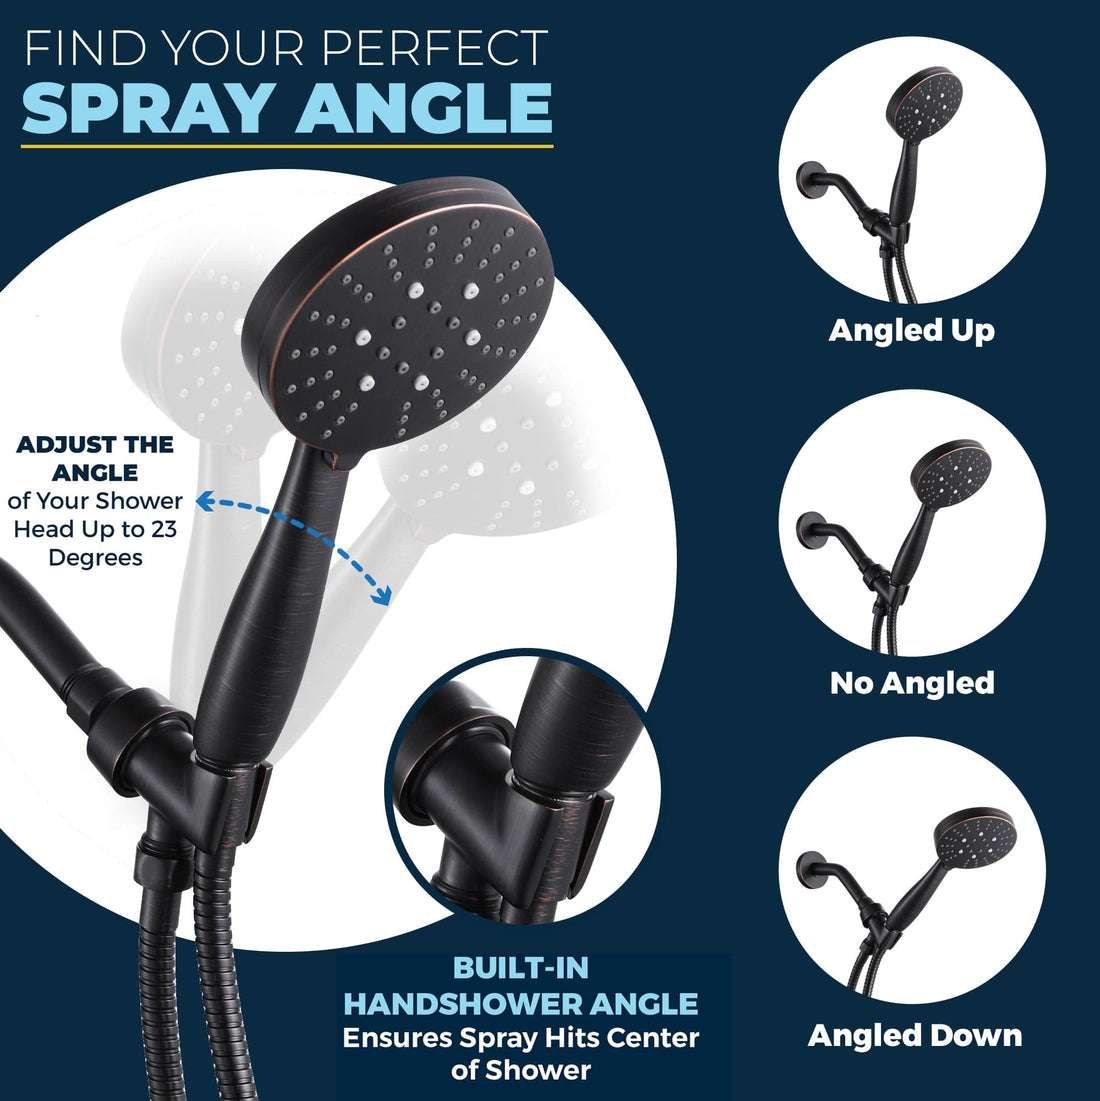 Perfect Spray Angle 3 Spray Settings for Handheld Shower Head Massage Wide and Mist Spray 2.5 / Oil Rubbed Bronze - The Shower Head Store